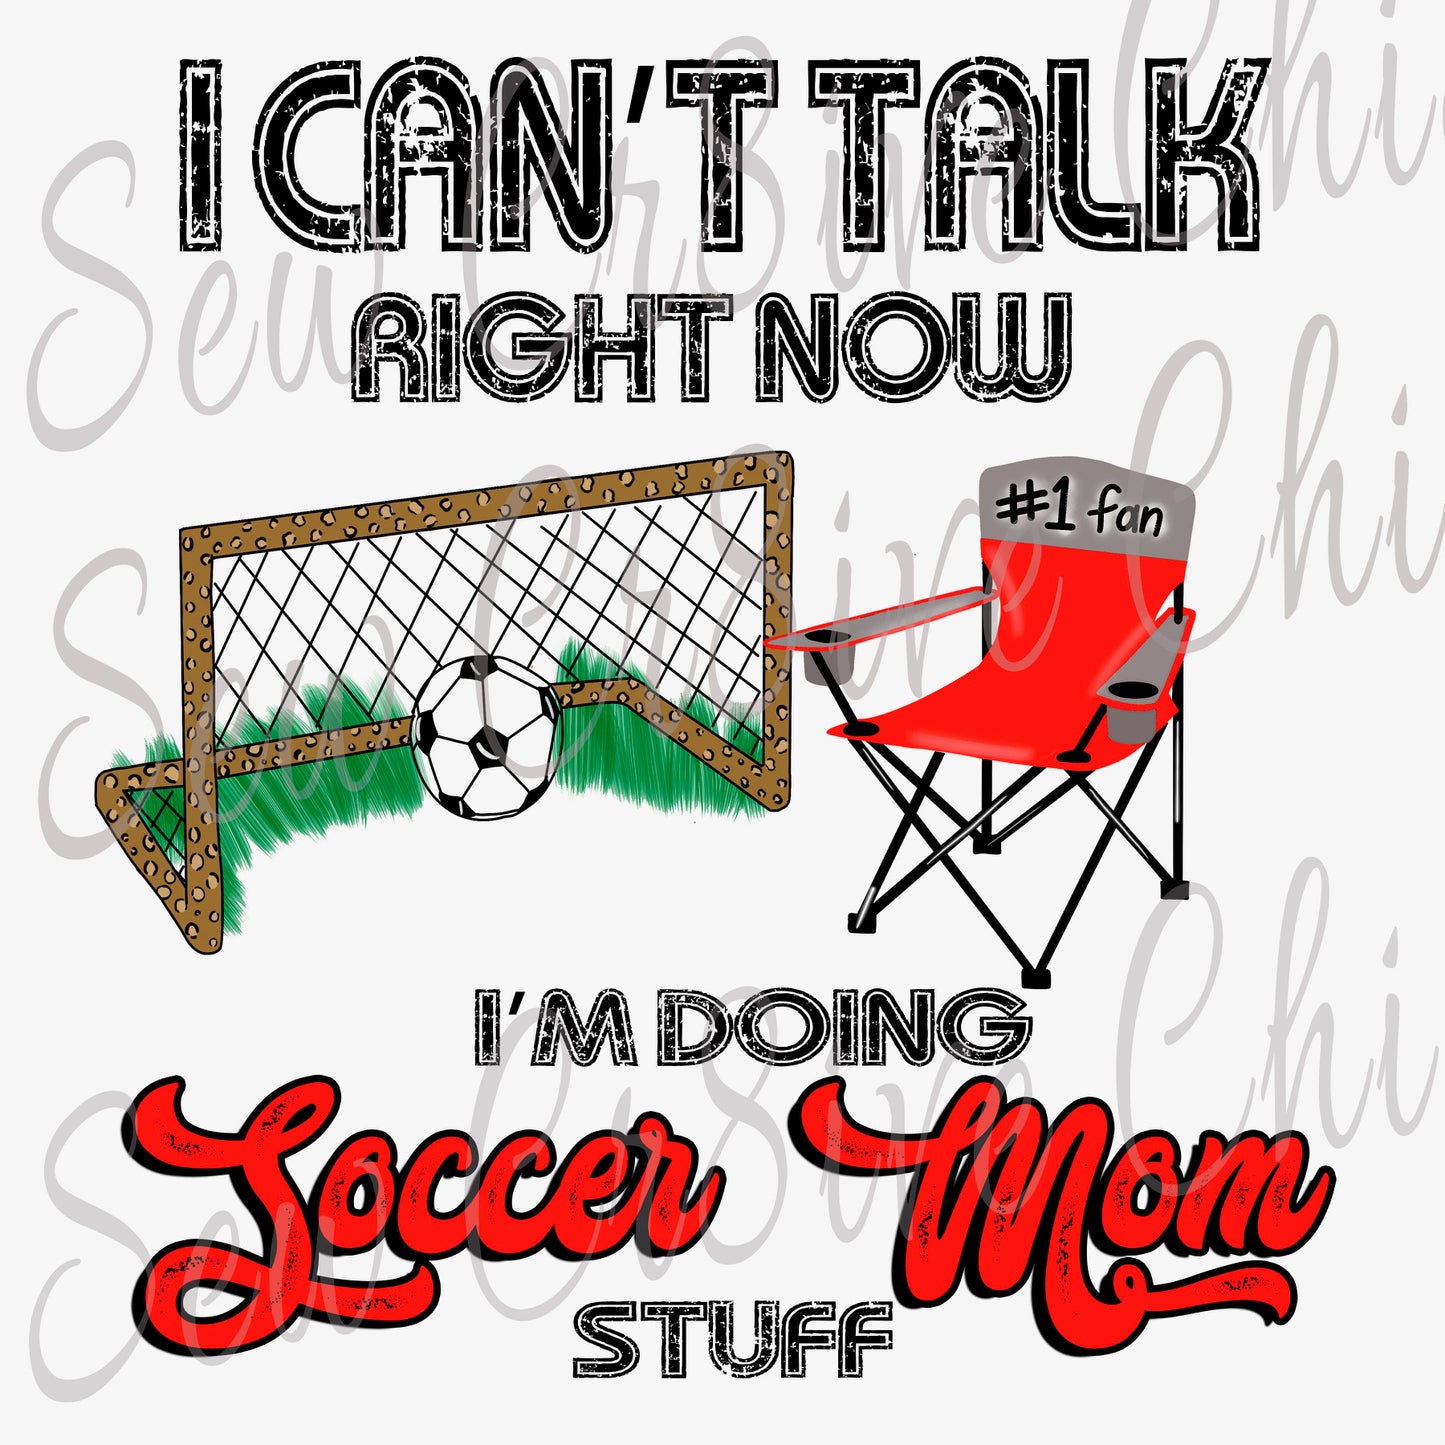 I cant talk right now Im doing soccer mom stuff